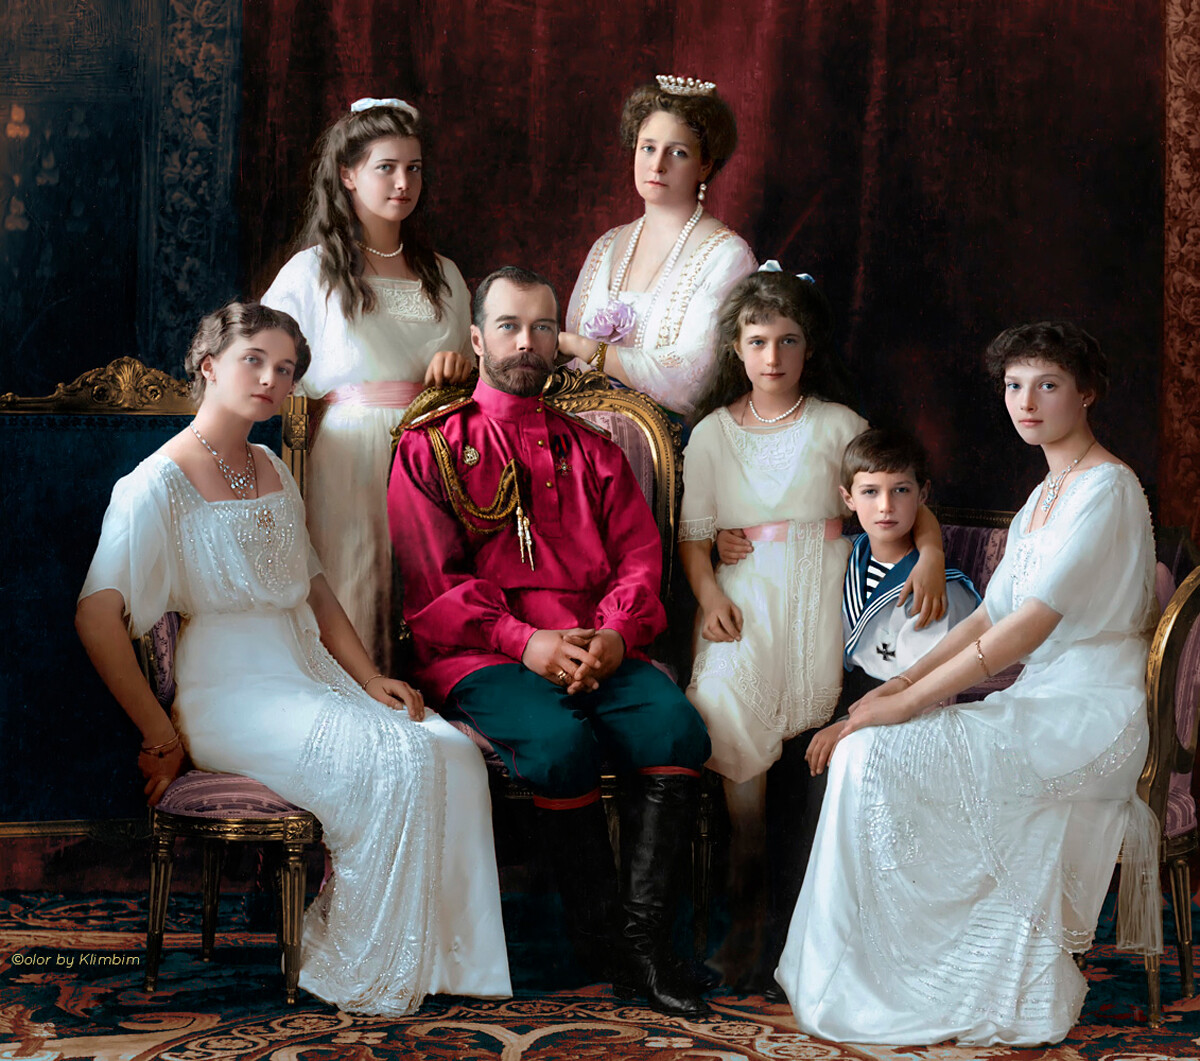 Nicholas II with his wife and children